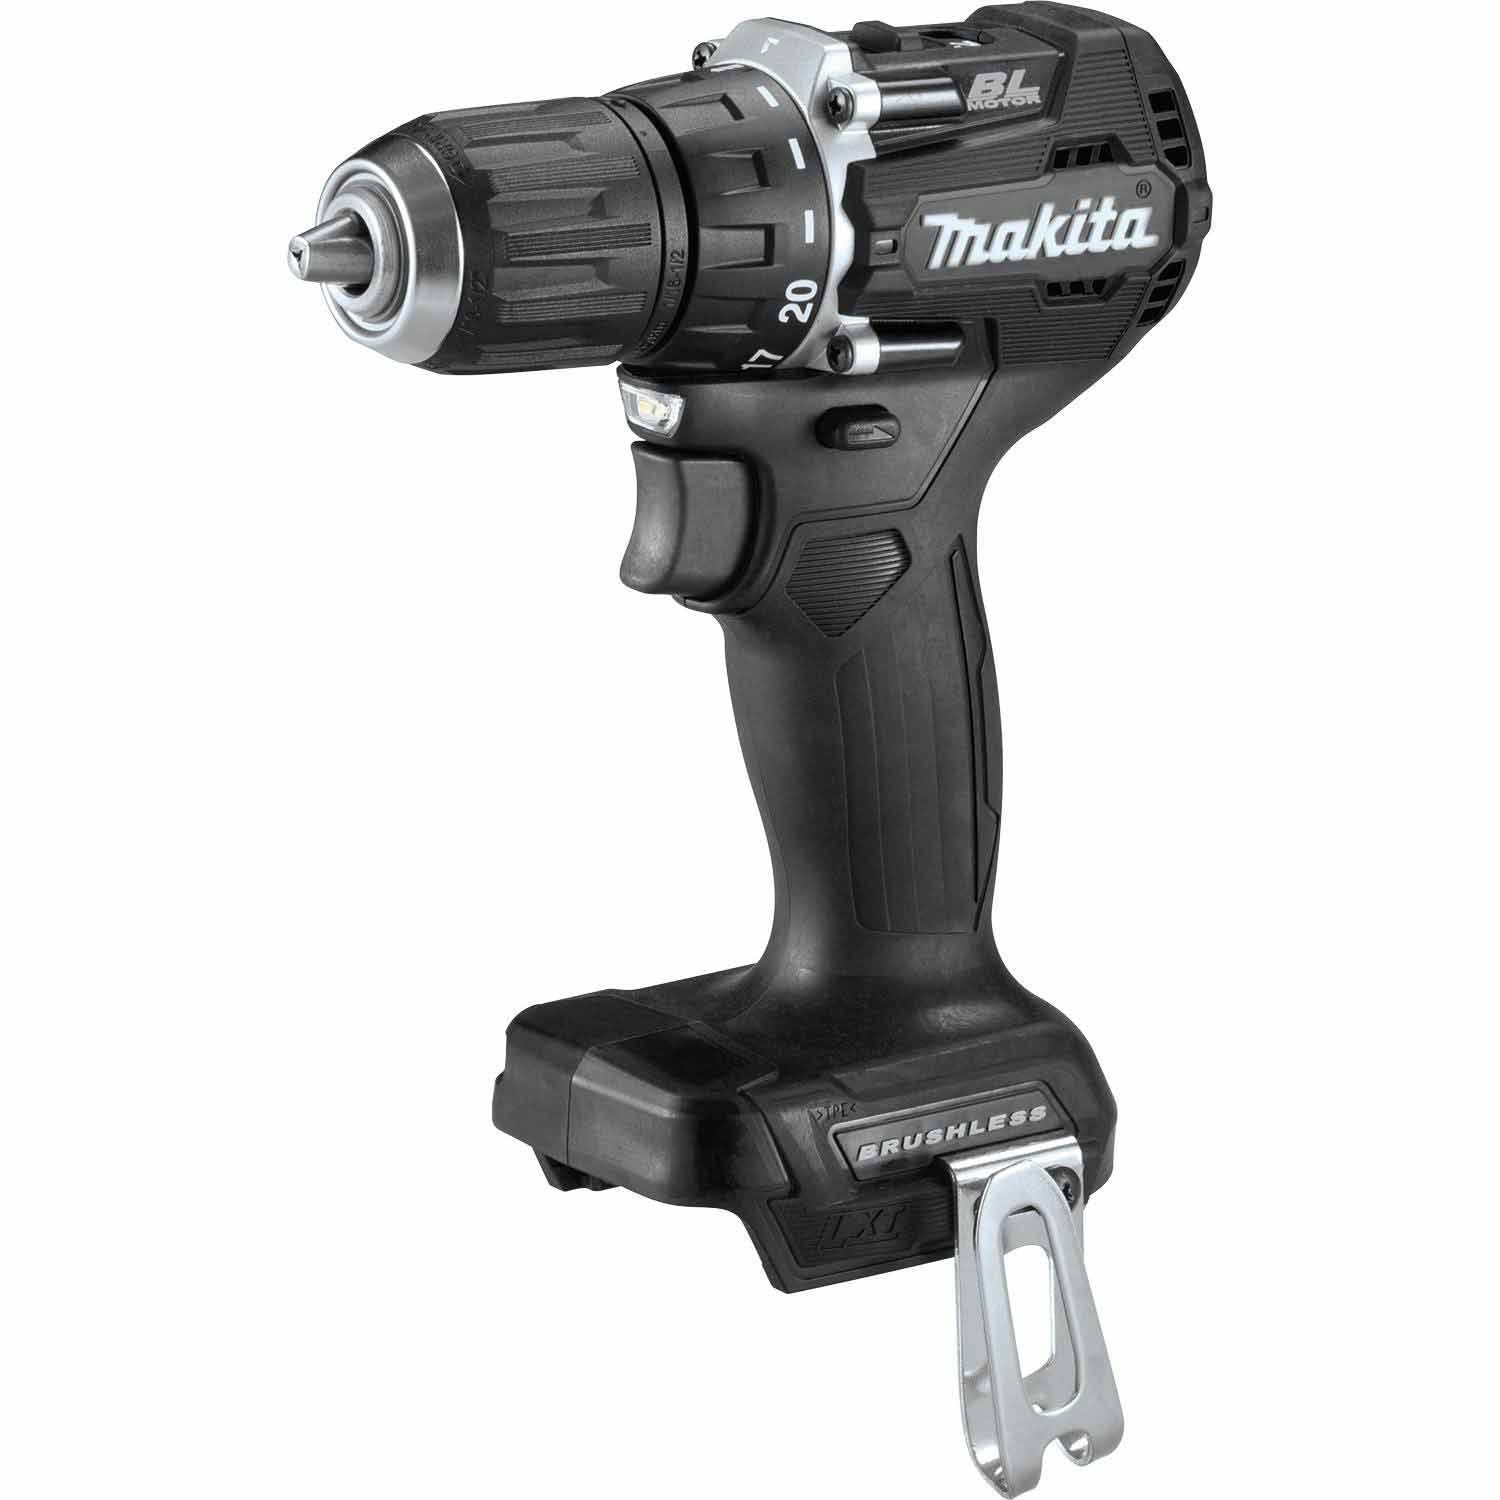 Makita XFD15ZB 18V LXT 1/2" Driver-Drill, Tool Only